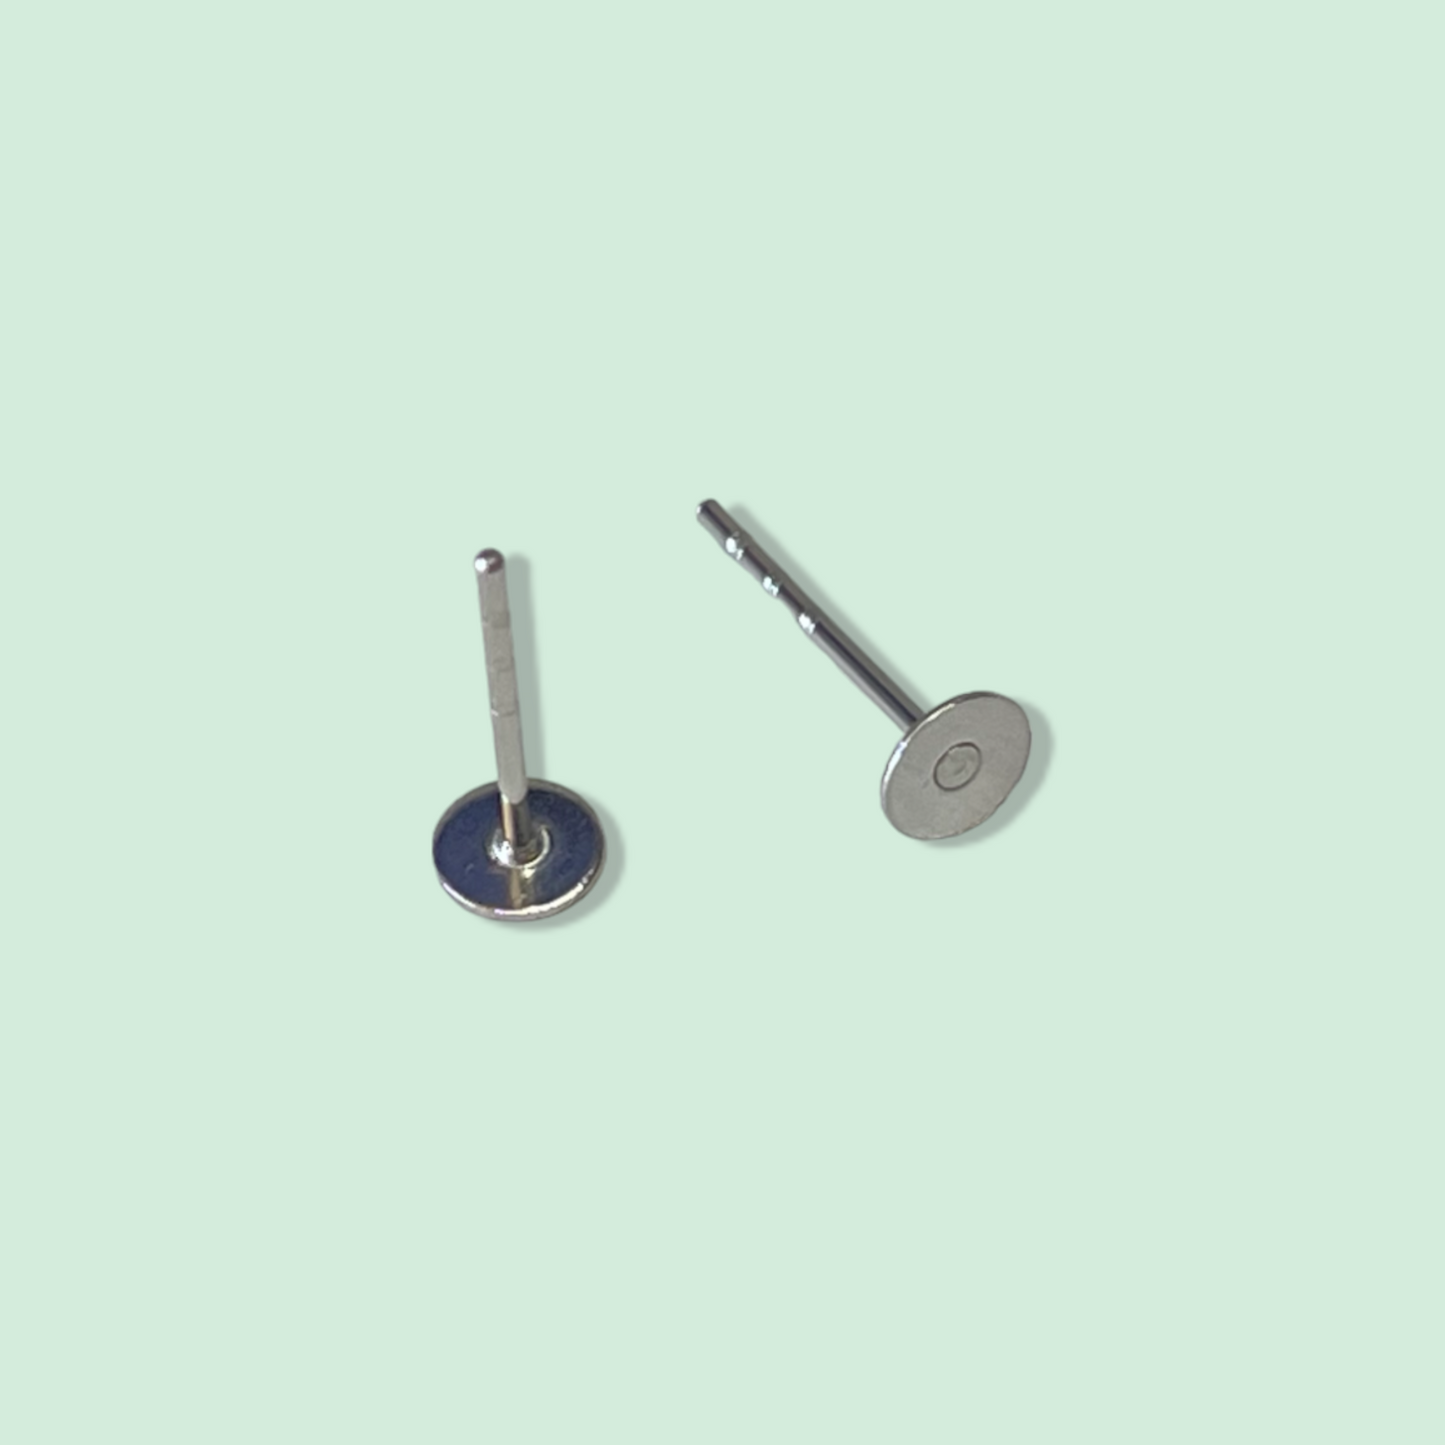 316 Surgical Stainless Steel Earring Posts - 3mm - including earring backs